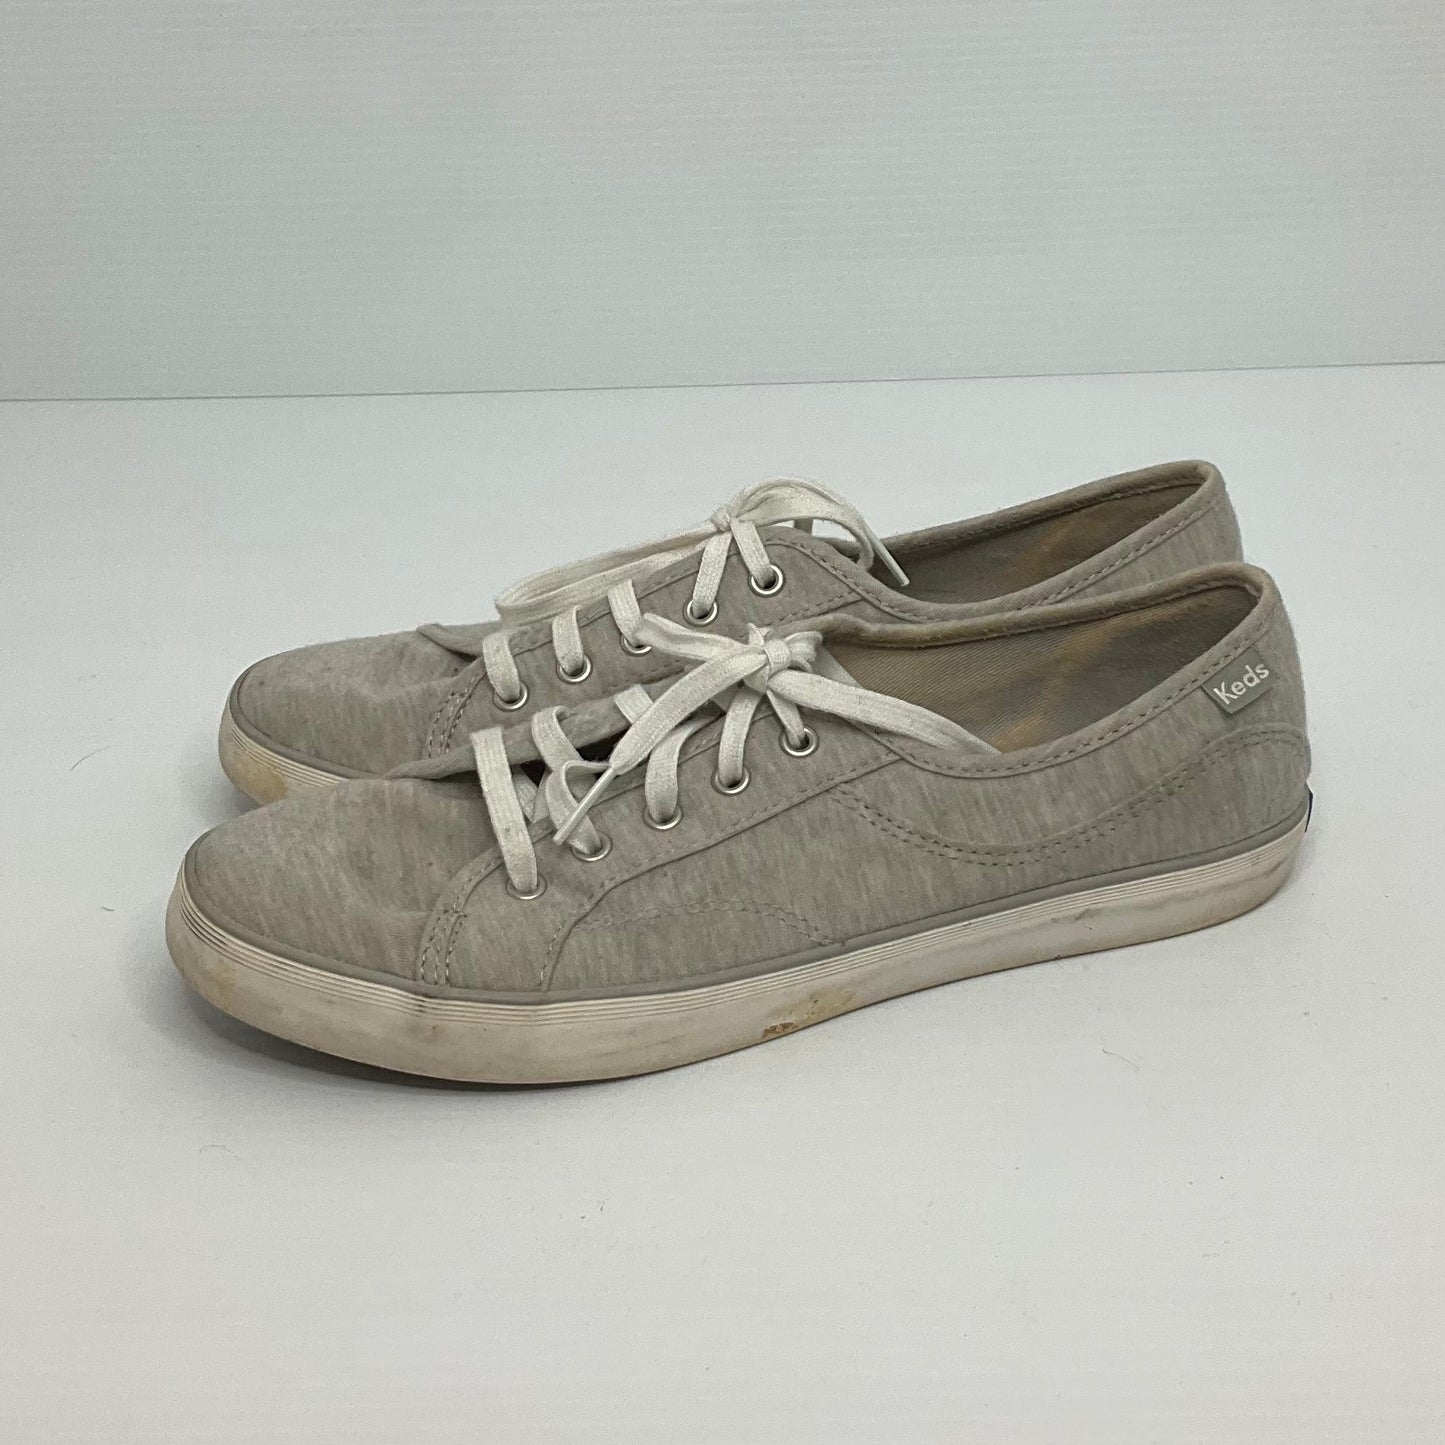 Grey Shoes Sneakers Keds, Size 8.5